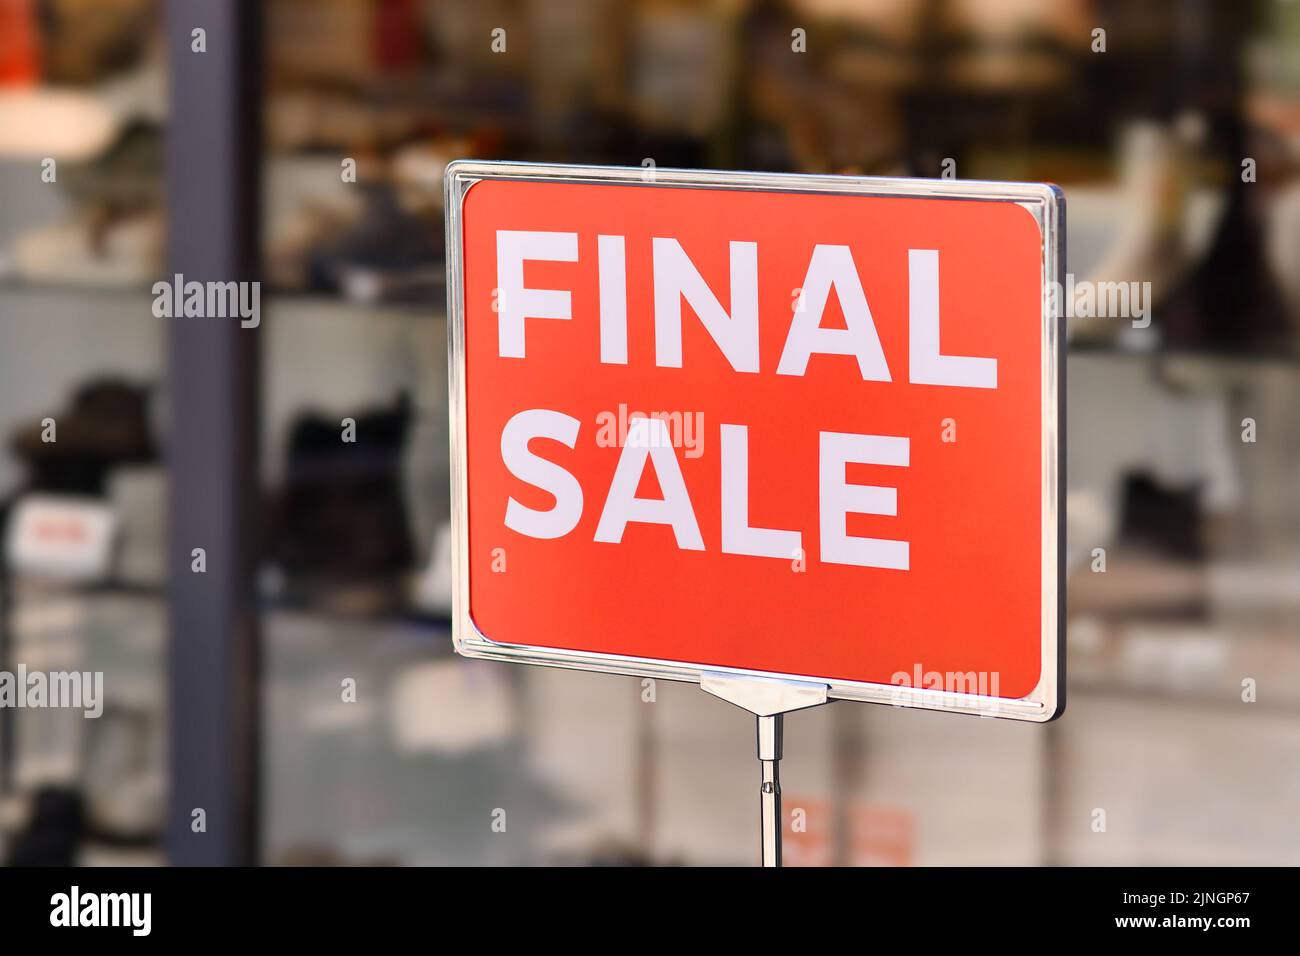 Red sign in front of shop saying 'Final Sale' Stock Photo